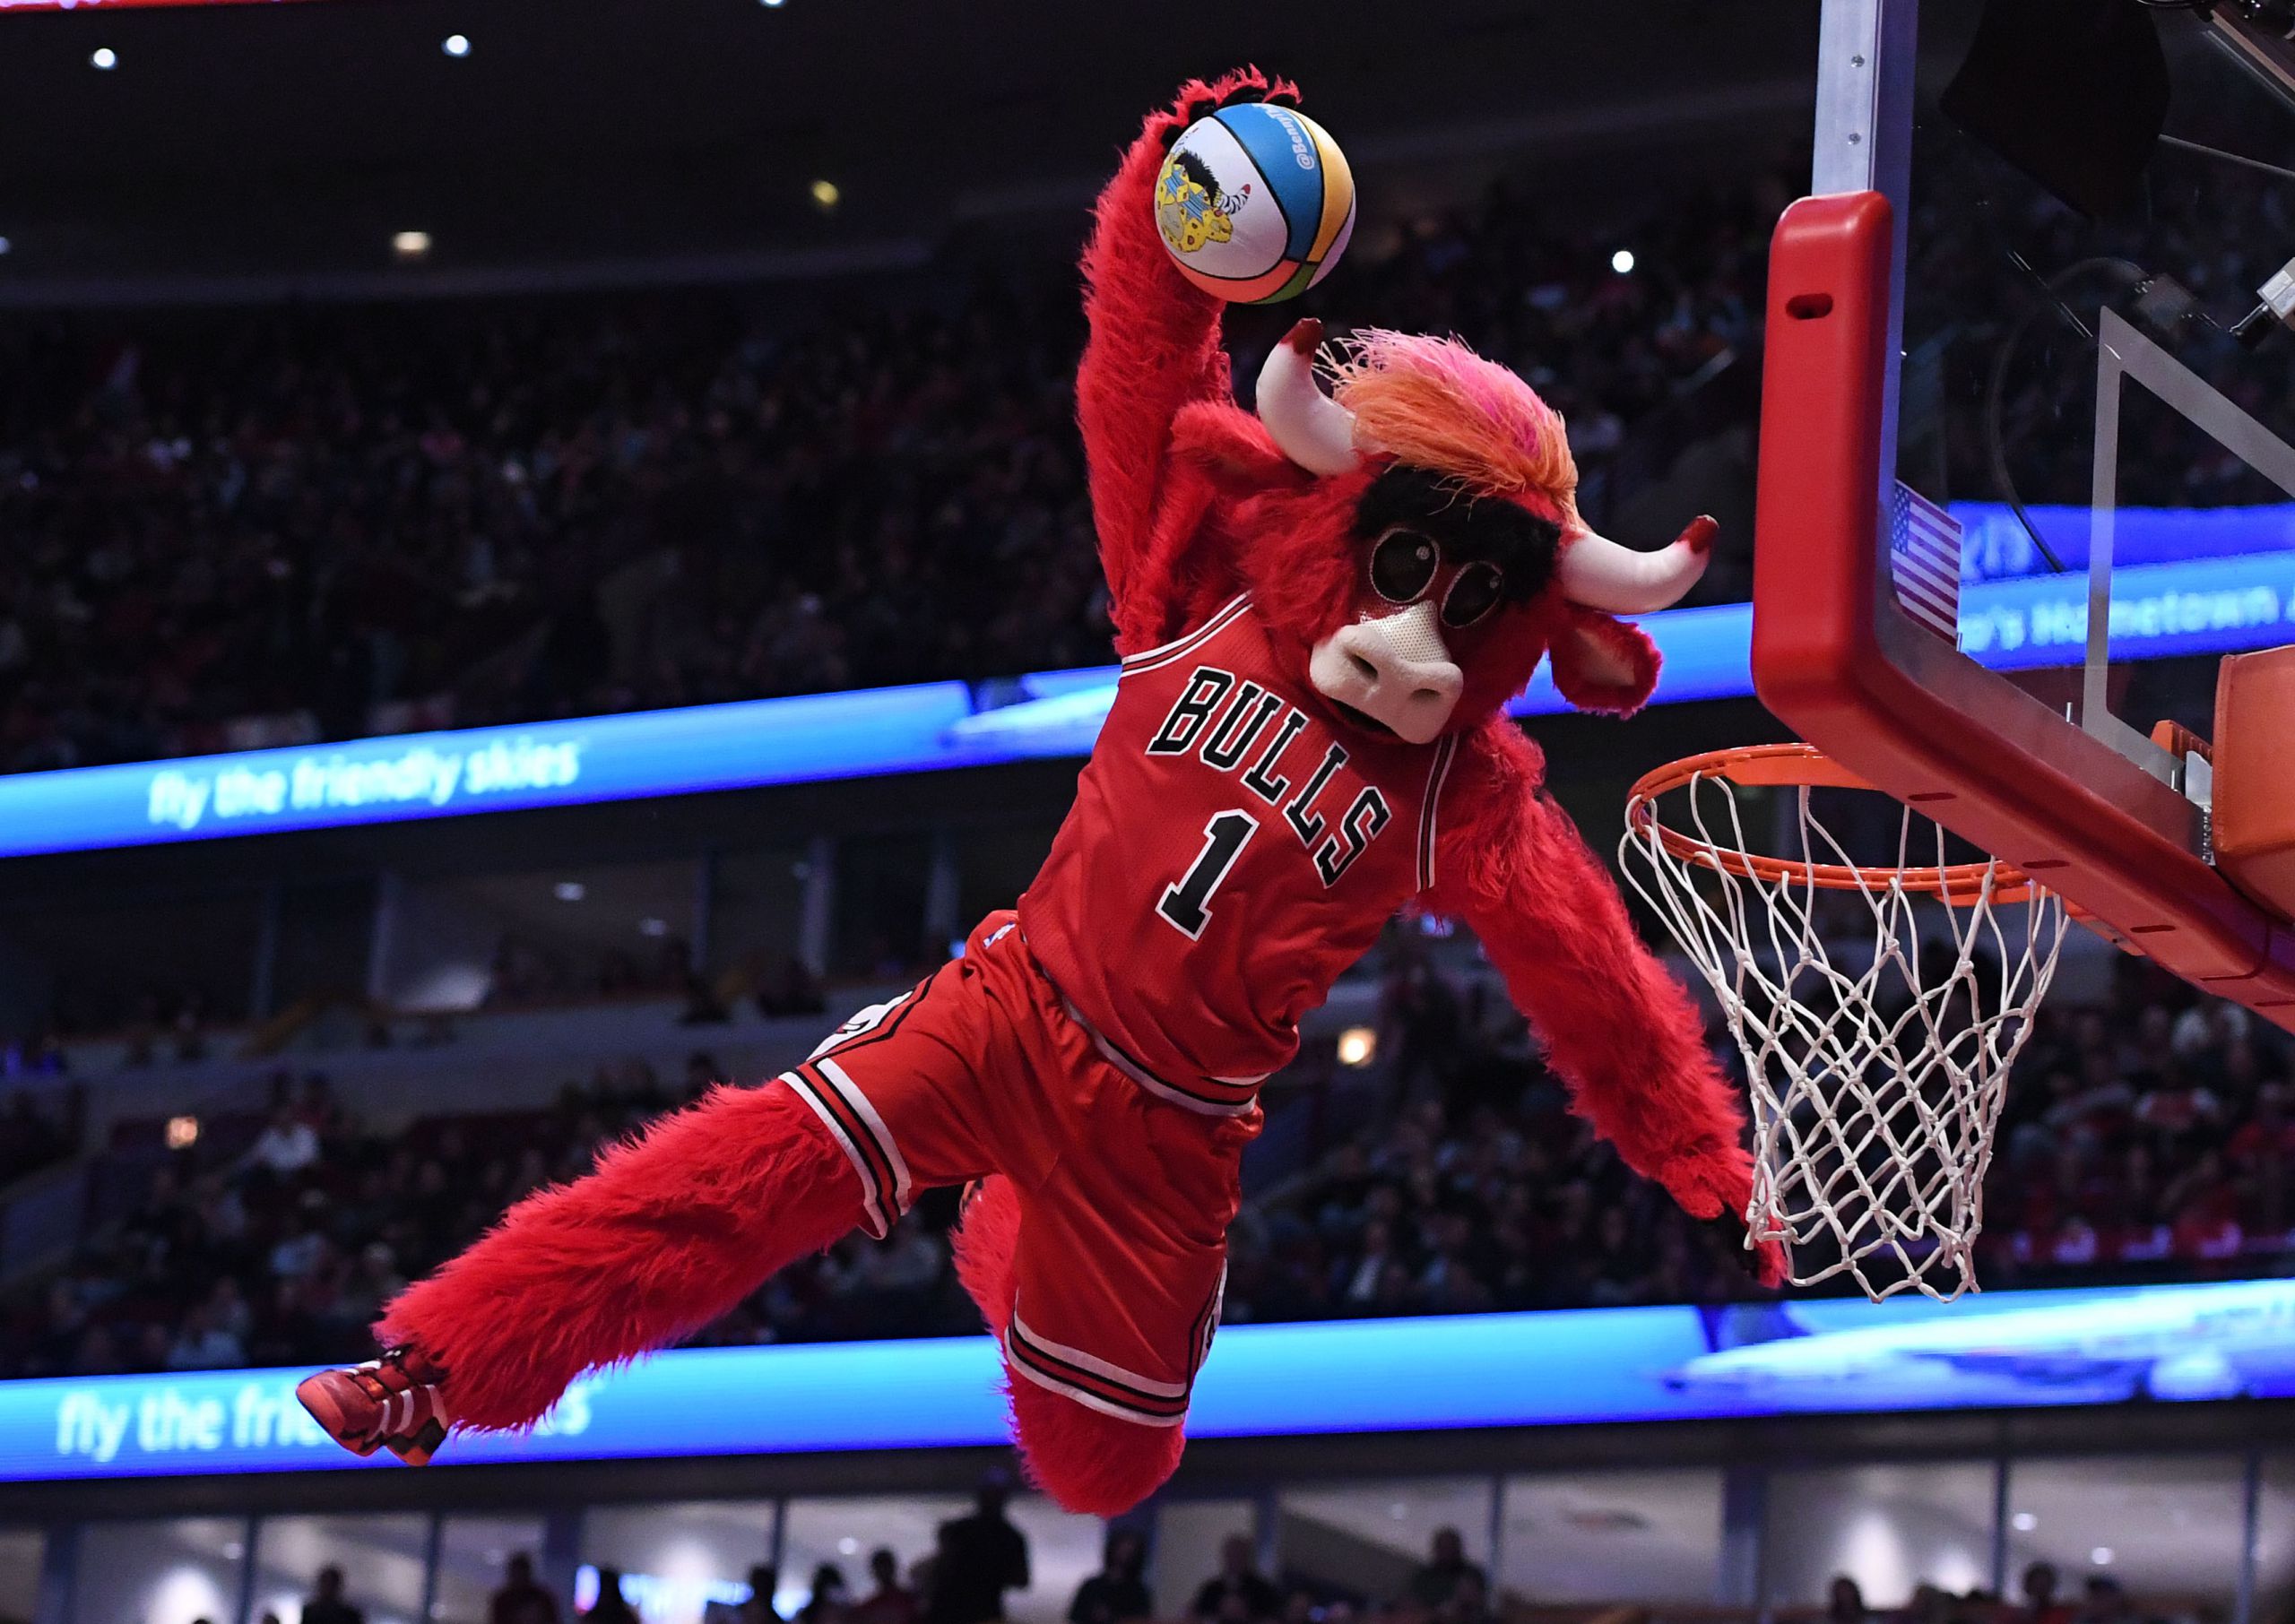 Chicago Bulls Become First Team To Launch Branded Content On TikTok